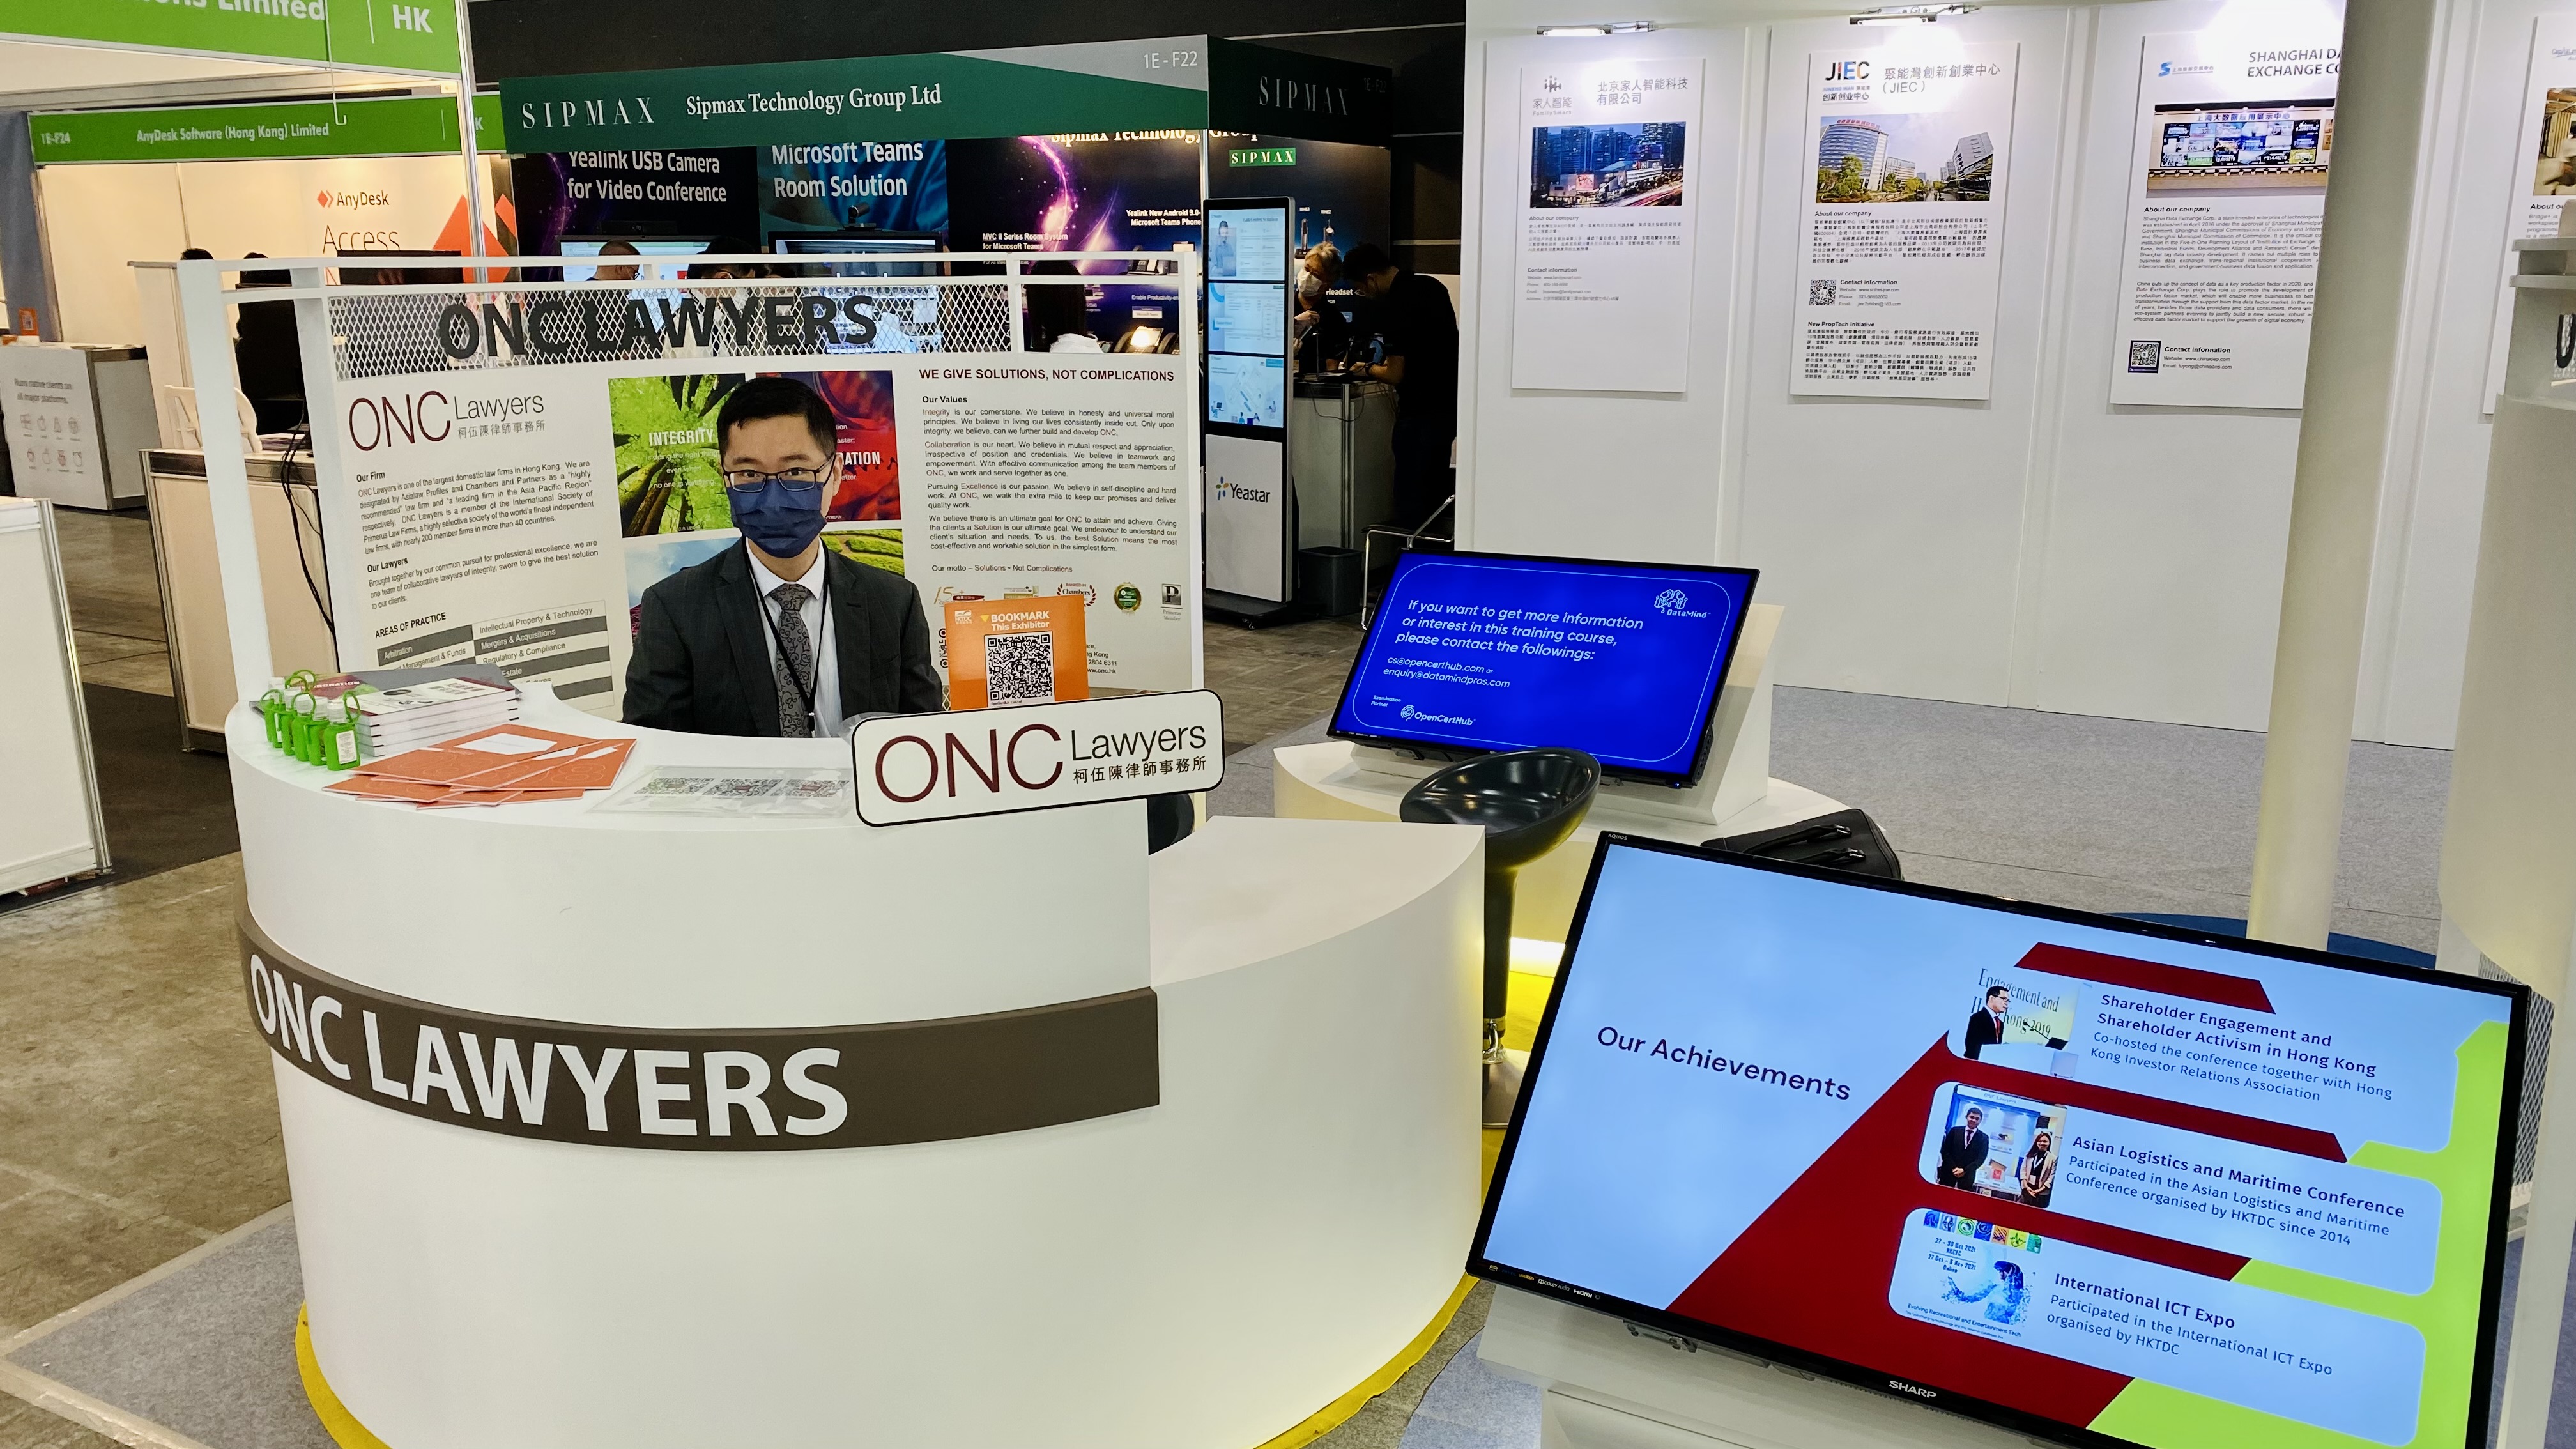 ONC Lawyers sponsored the B4B Challenge and participated in the International ICT Expo 2021